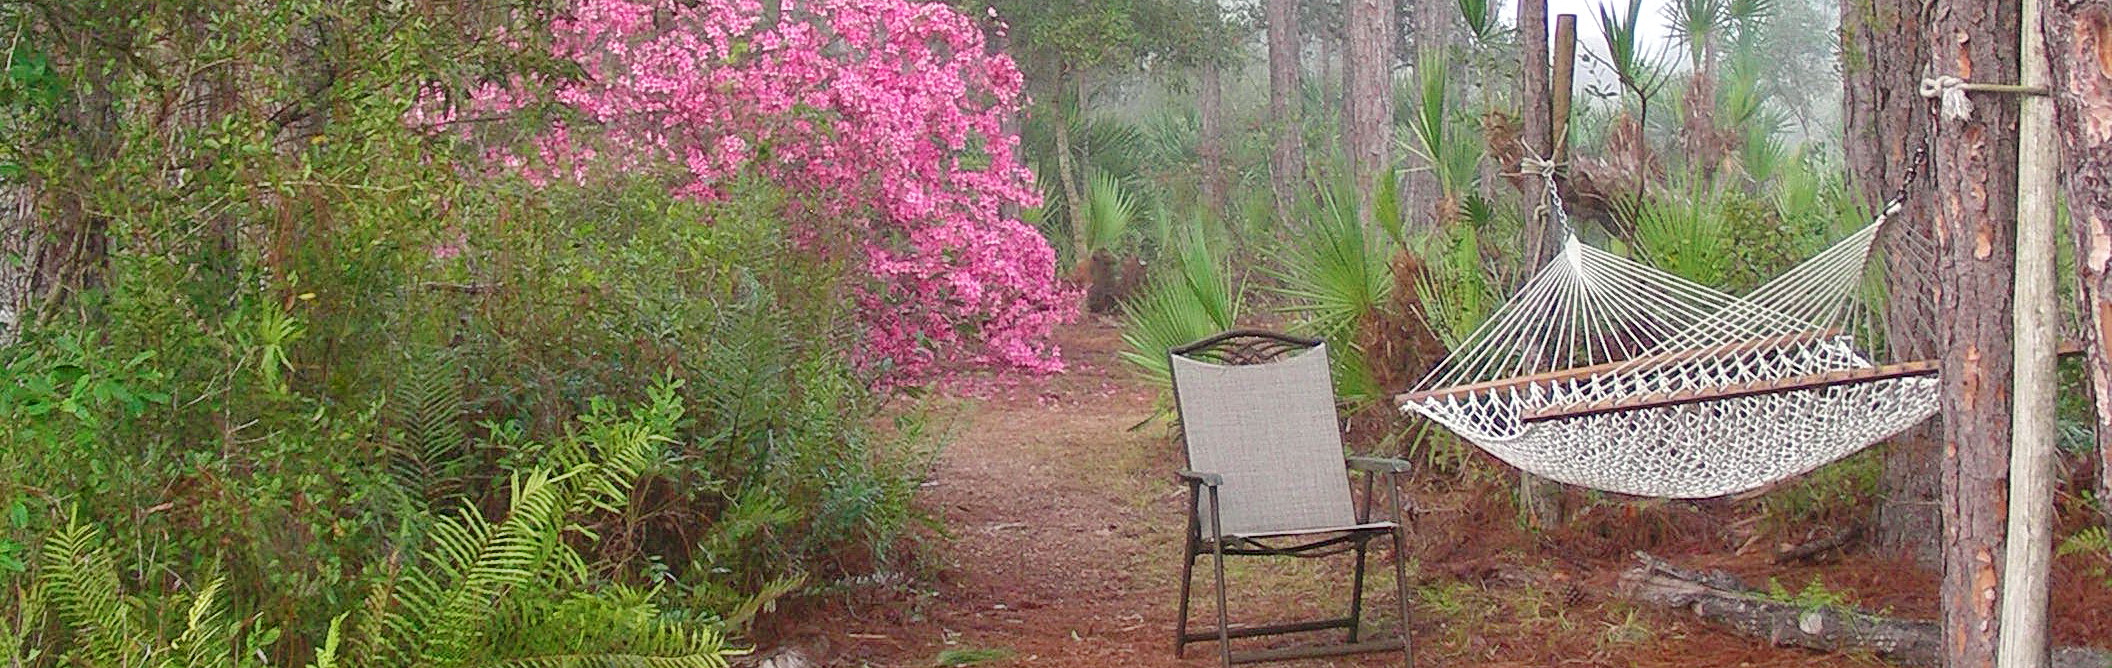 Landscaping with Natives is Florida Smart!